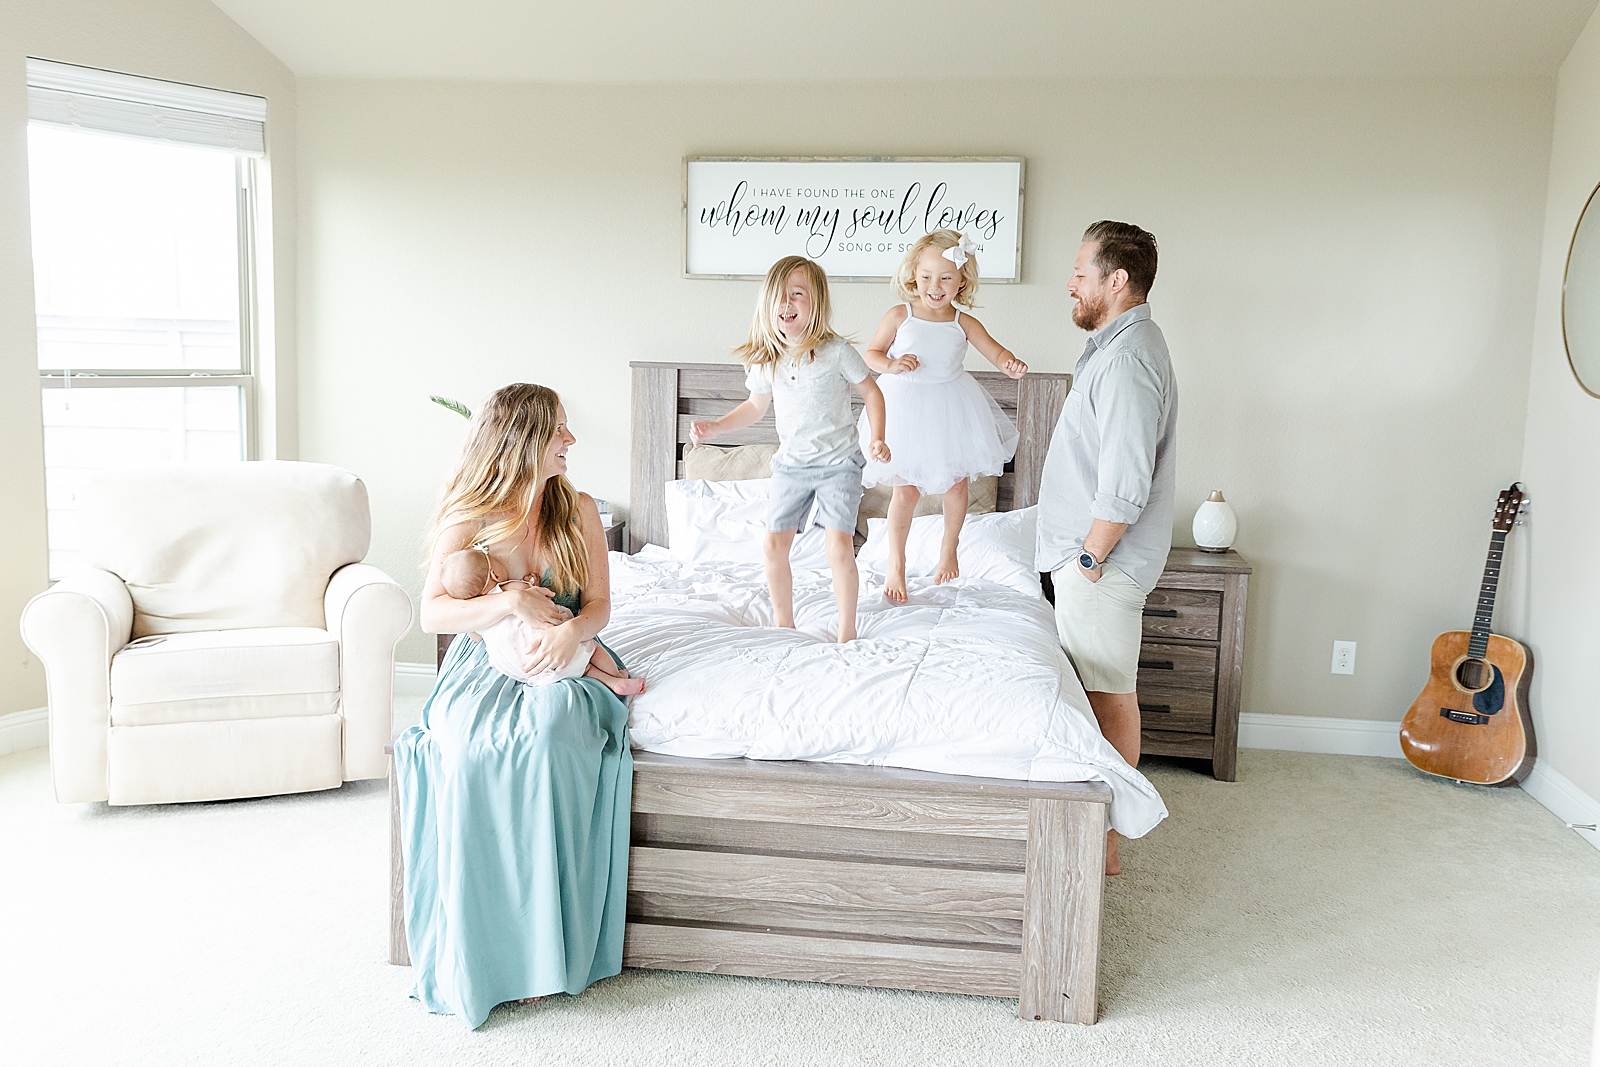 siblings jumping on bed while mom nurses baby and dad plays with kids while they jump